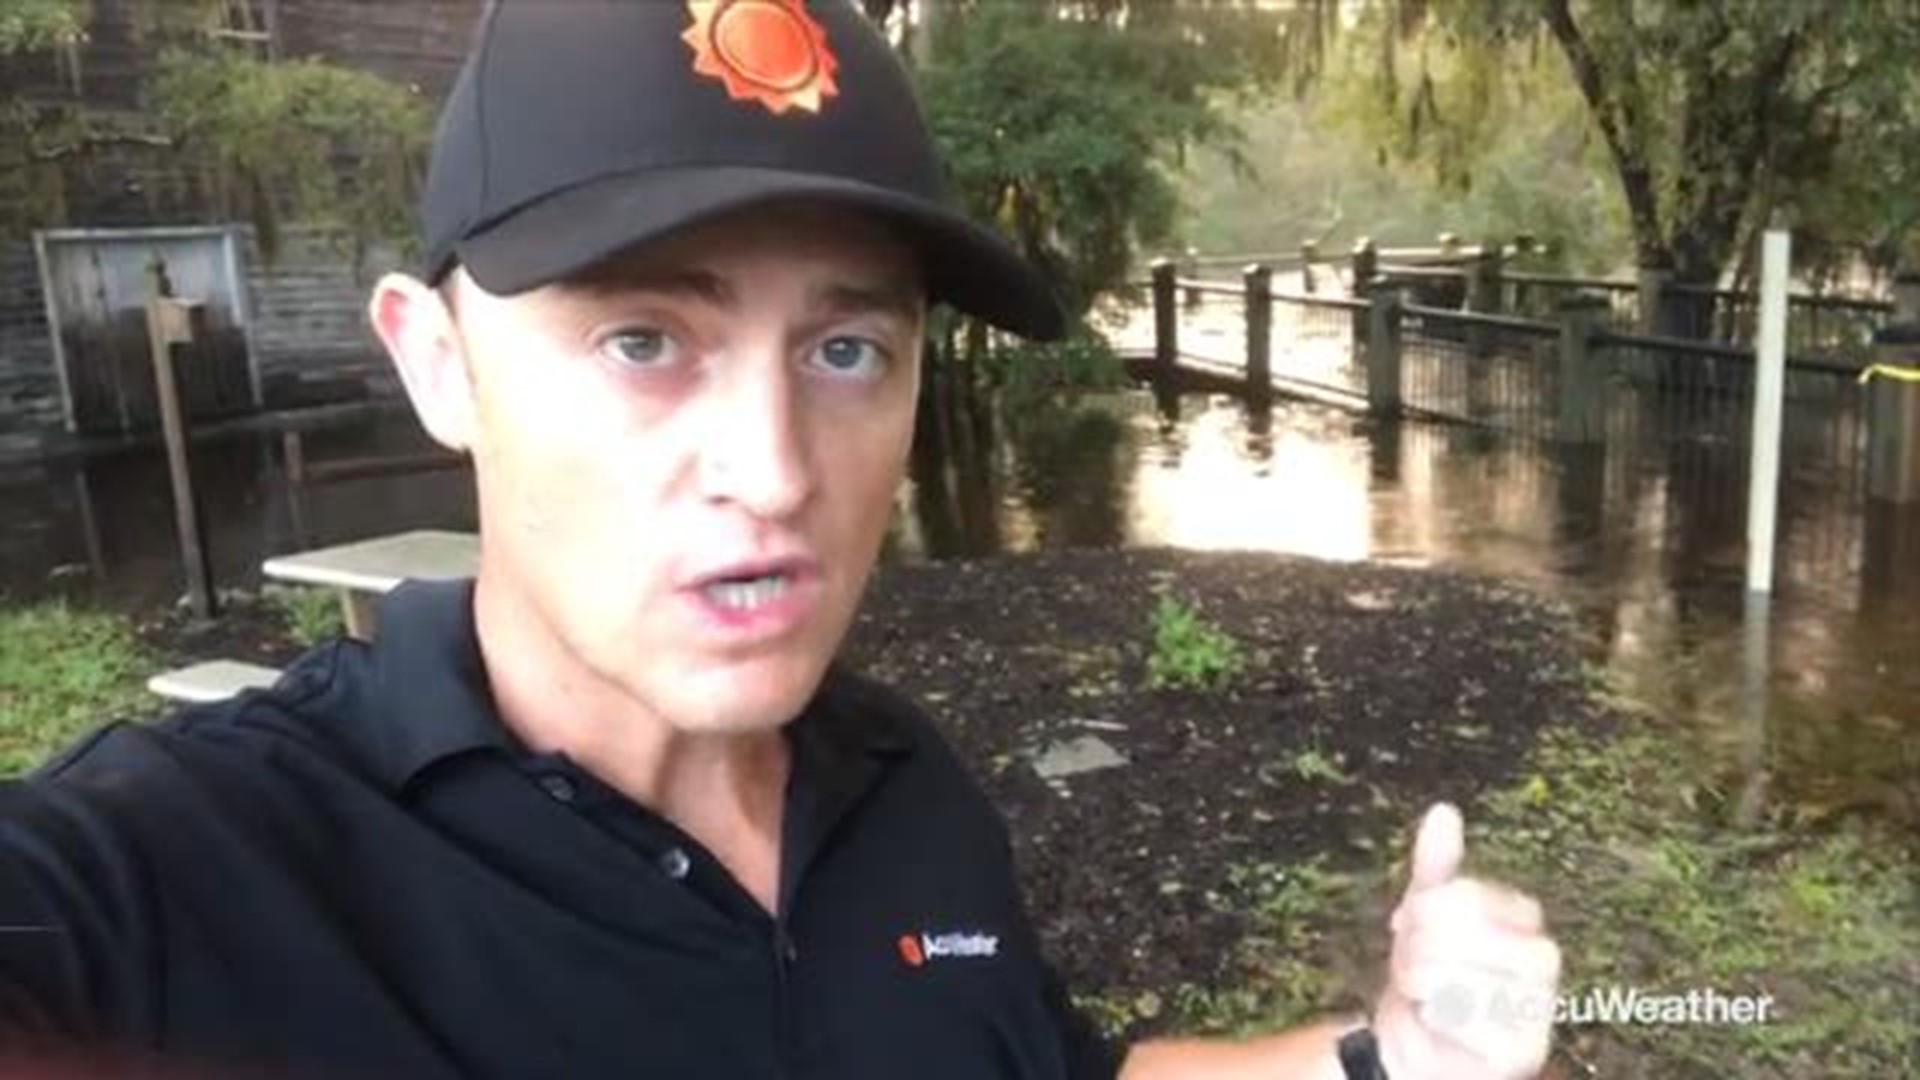 While Florence has moved on, the dangers of creasting rivers and severe flooding isn't over yet. Water levels continue to rise as flooding dangers slowly increase.